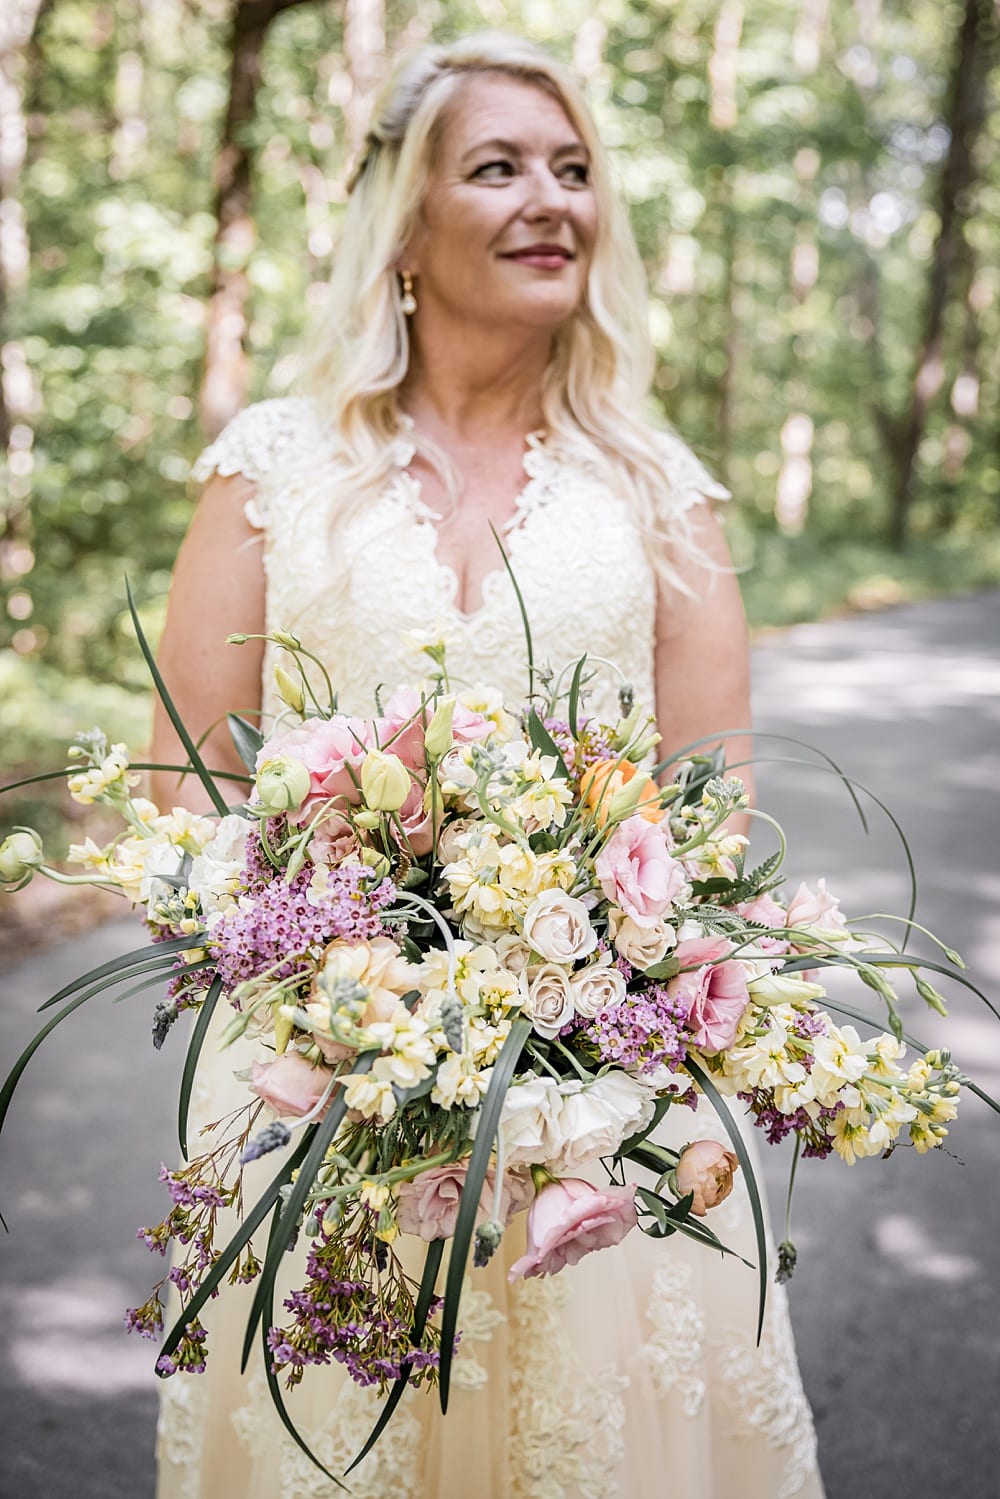 forest micro wedding